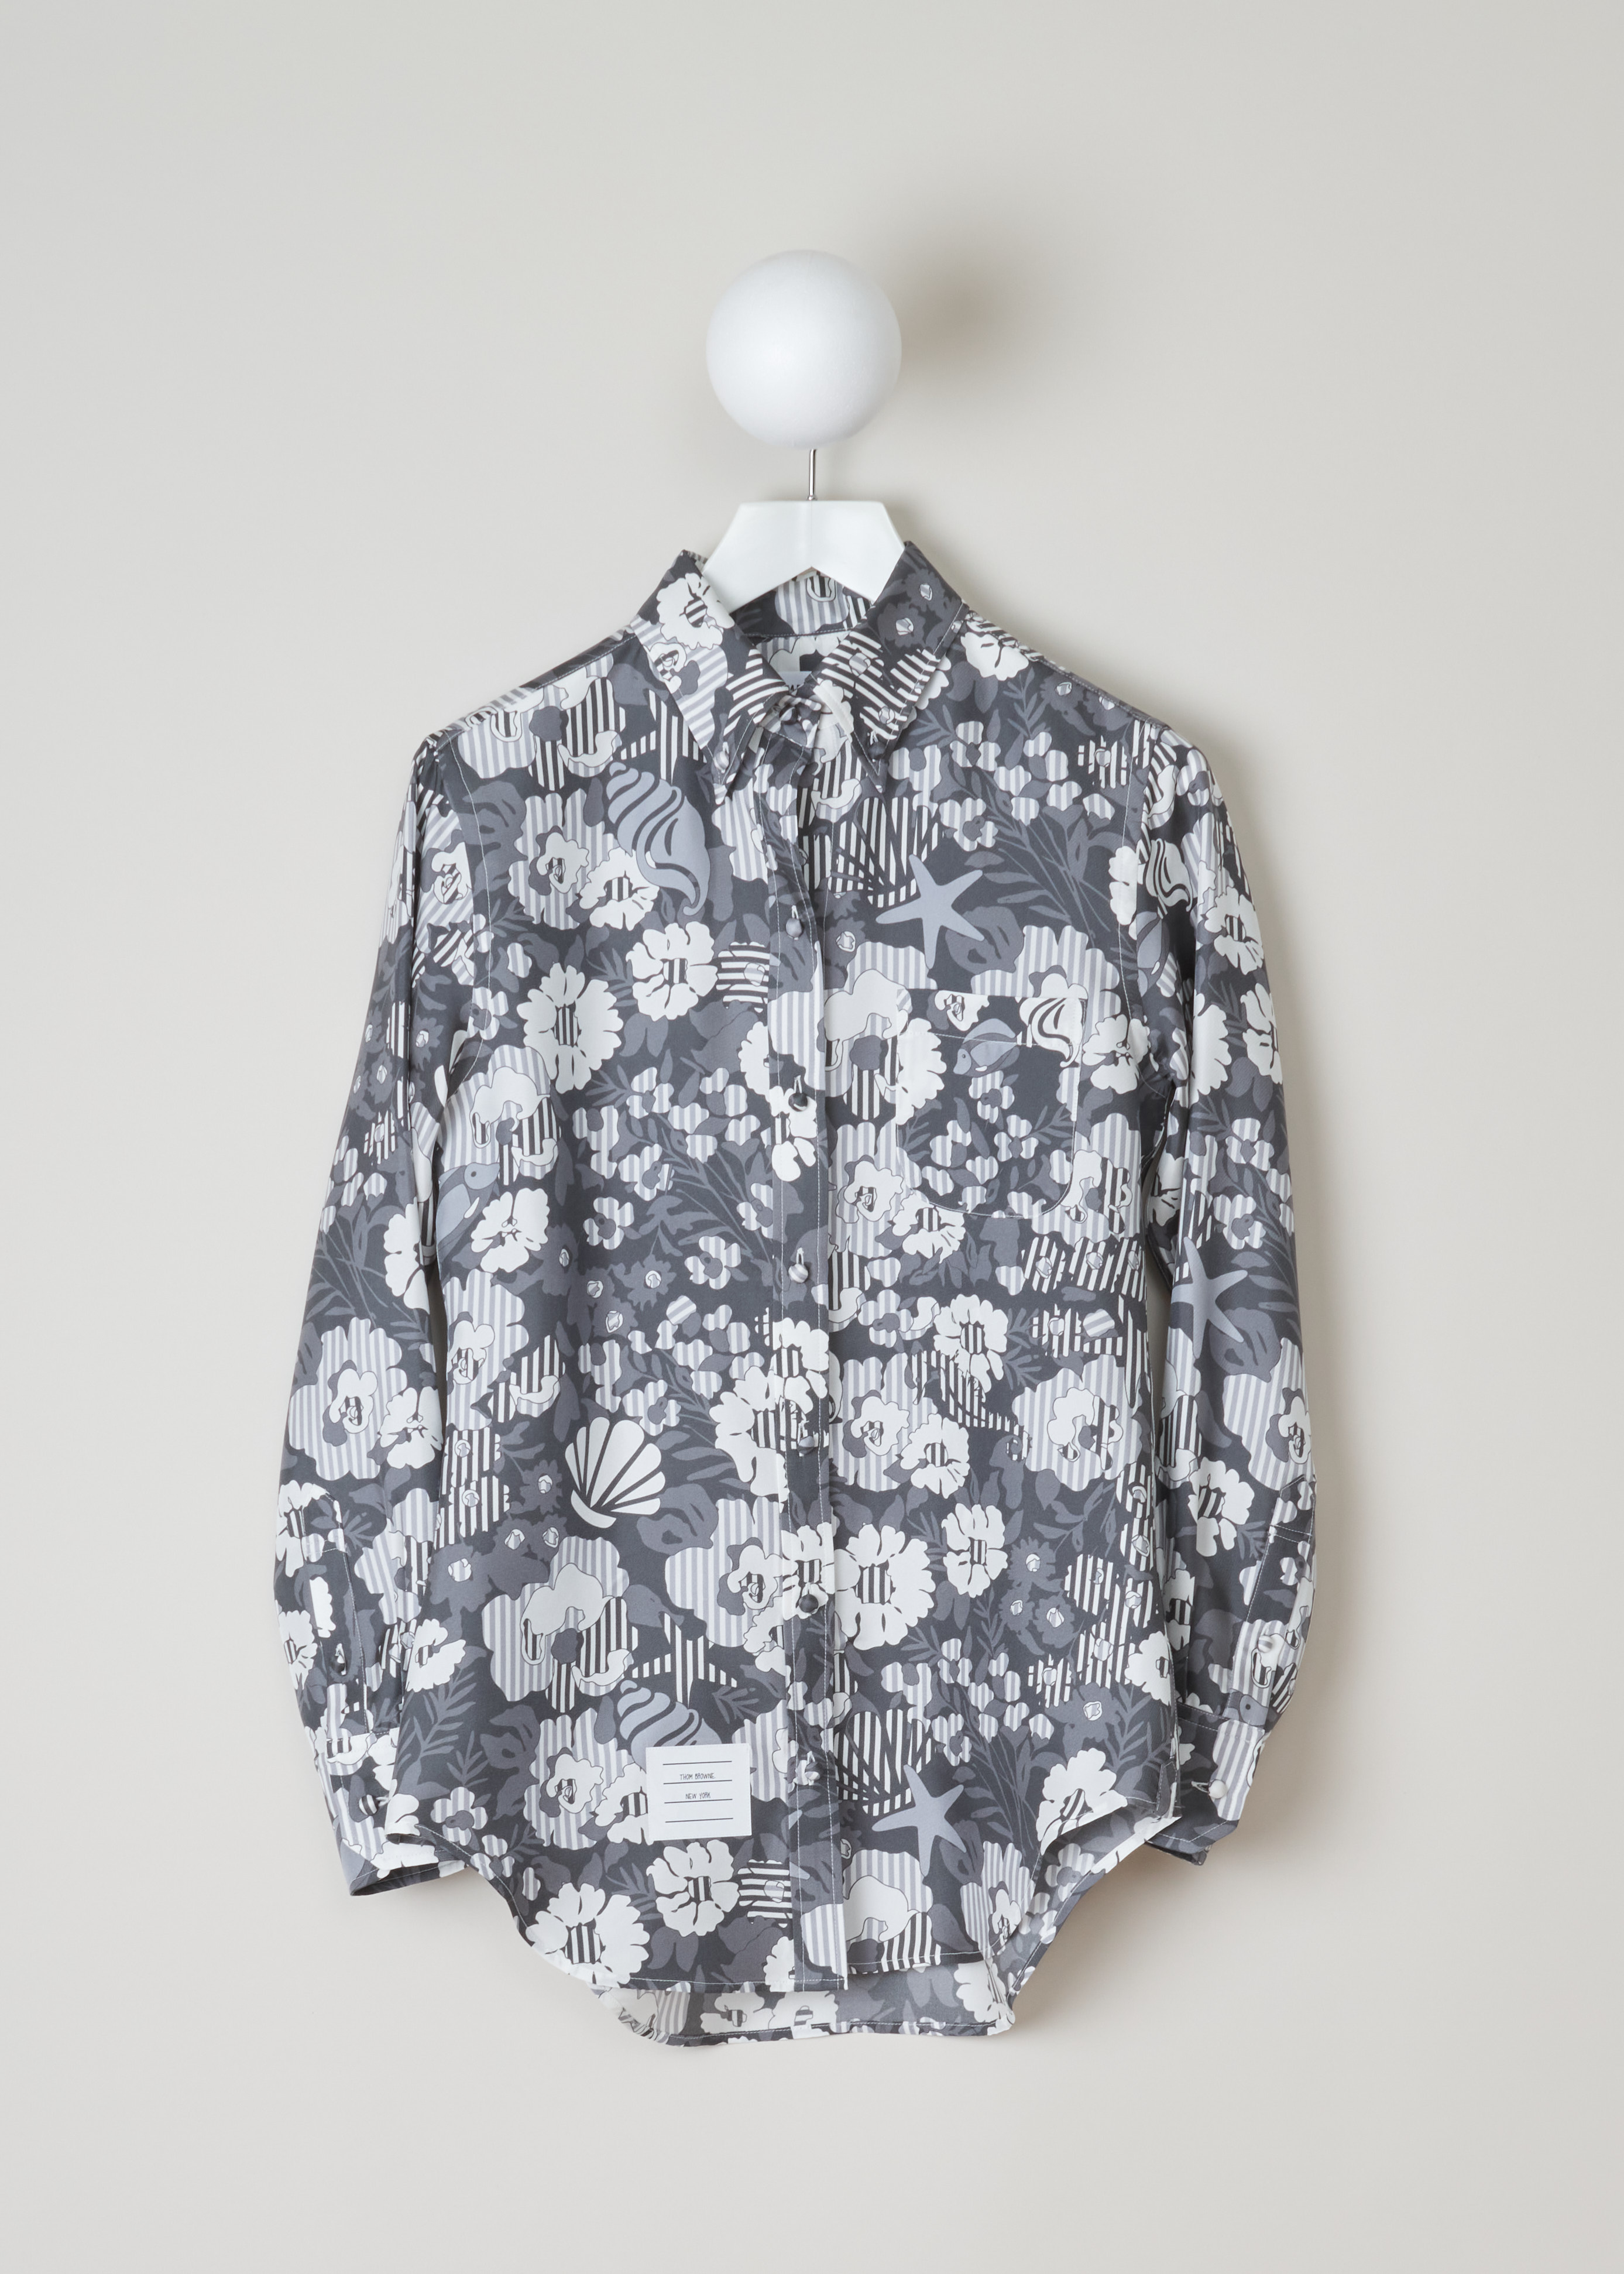 Thom Browne Sunny floral print shirt FLL005A_06160_035_Med_Grey front. Long sleeved shirt in the sunny floral pattern with a pointed, buttoned collar, a chest pocket, an exterior name tag, buttoned cuffs and a rounded hem.